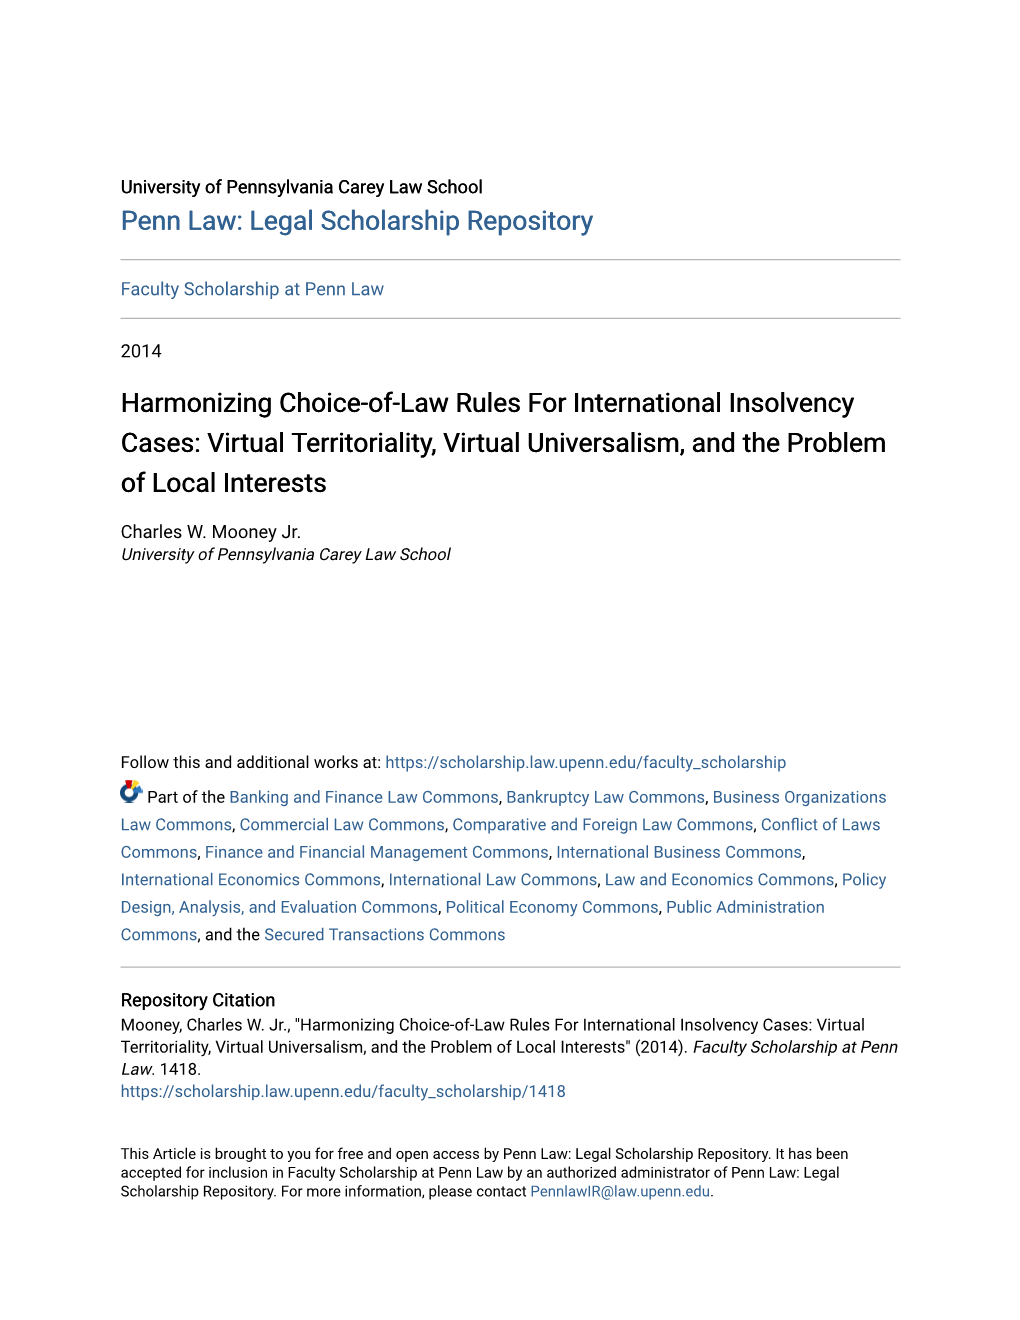 Harmonizing Choice-Of-Law Rules for International Insolvency Cases: Virtual Territoriality, Virtual Universalism, and the Problem of Local Interests